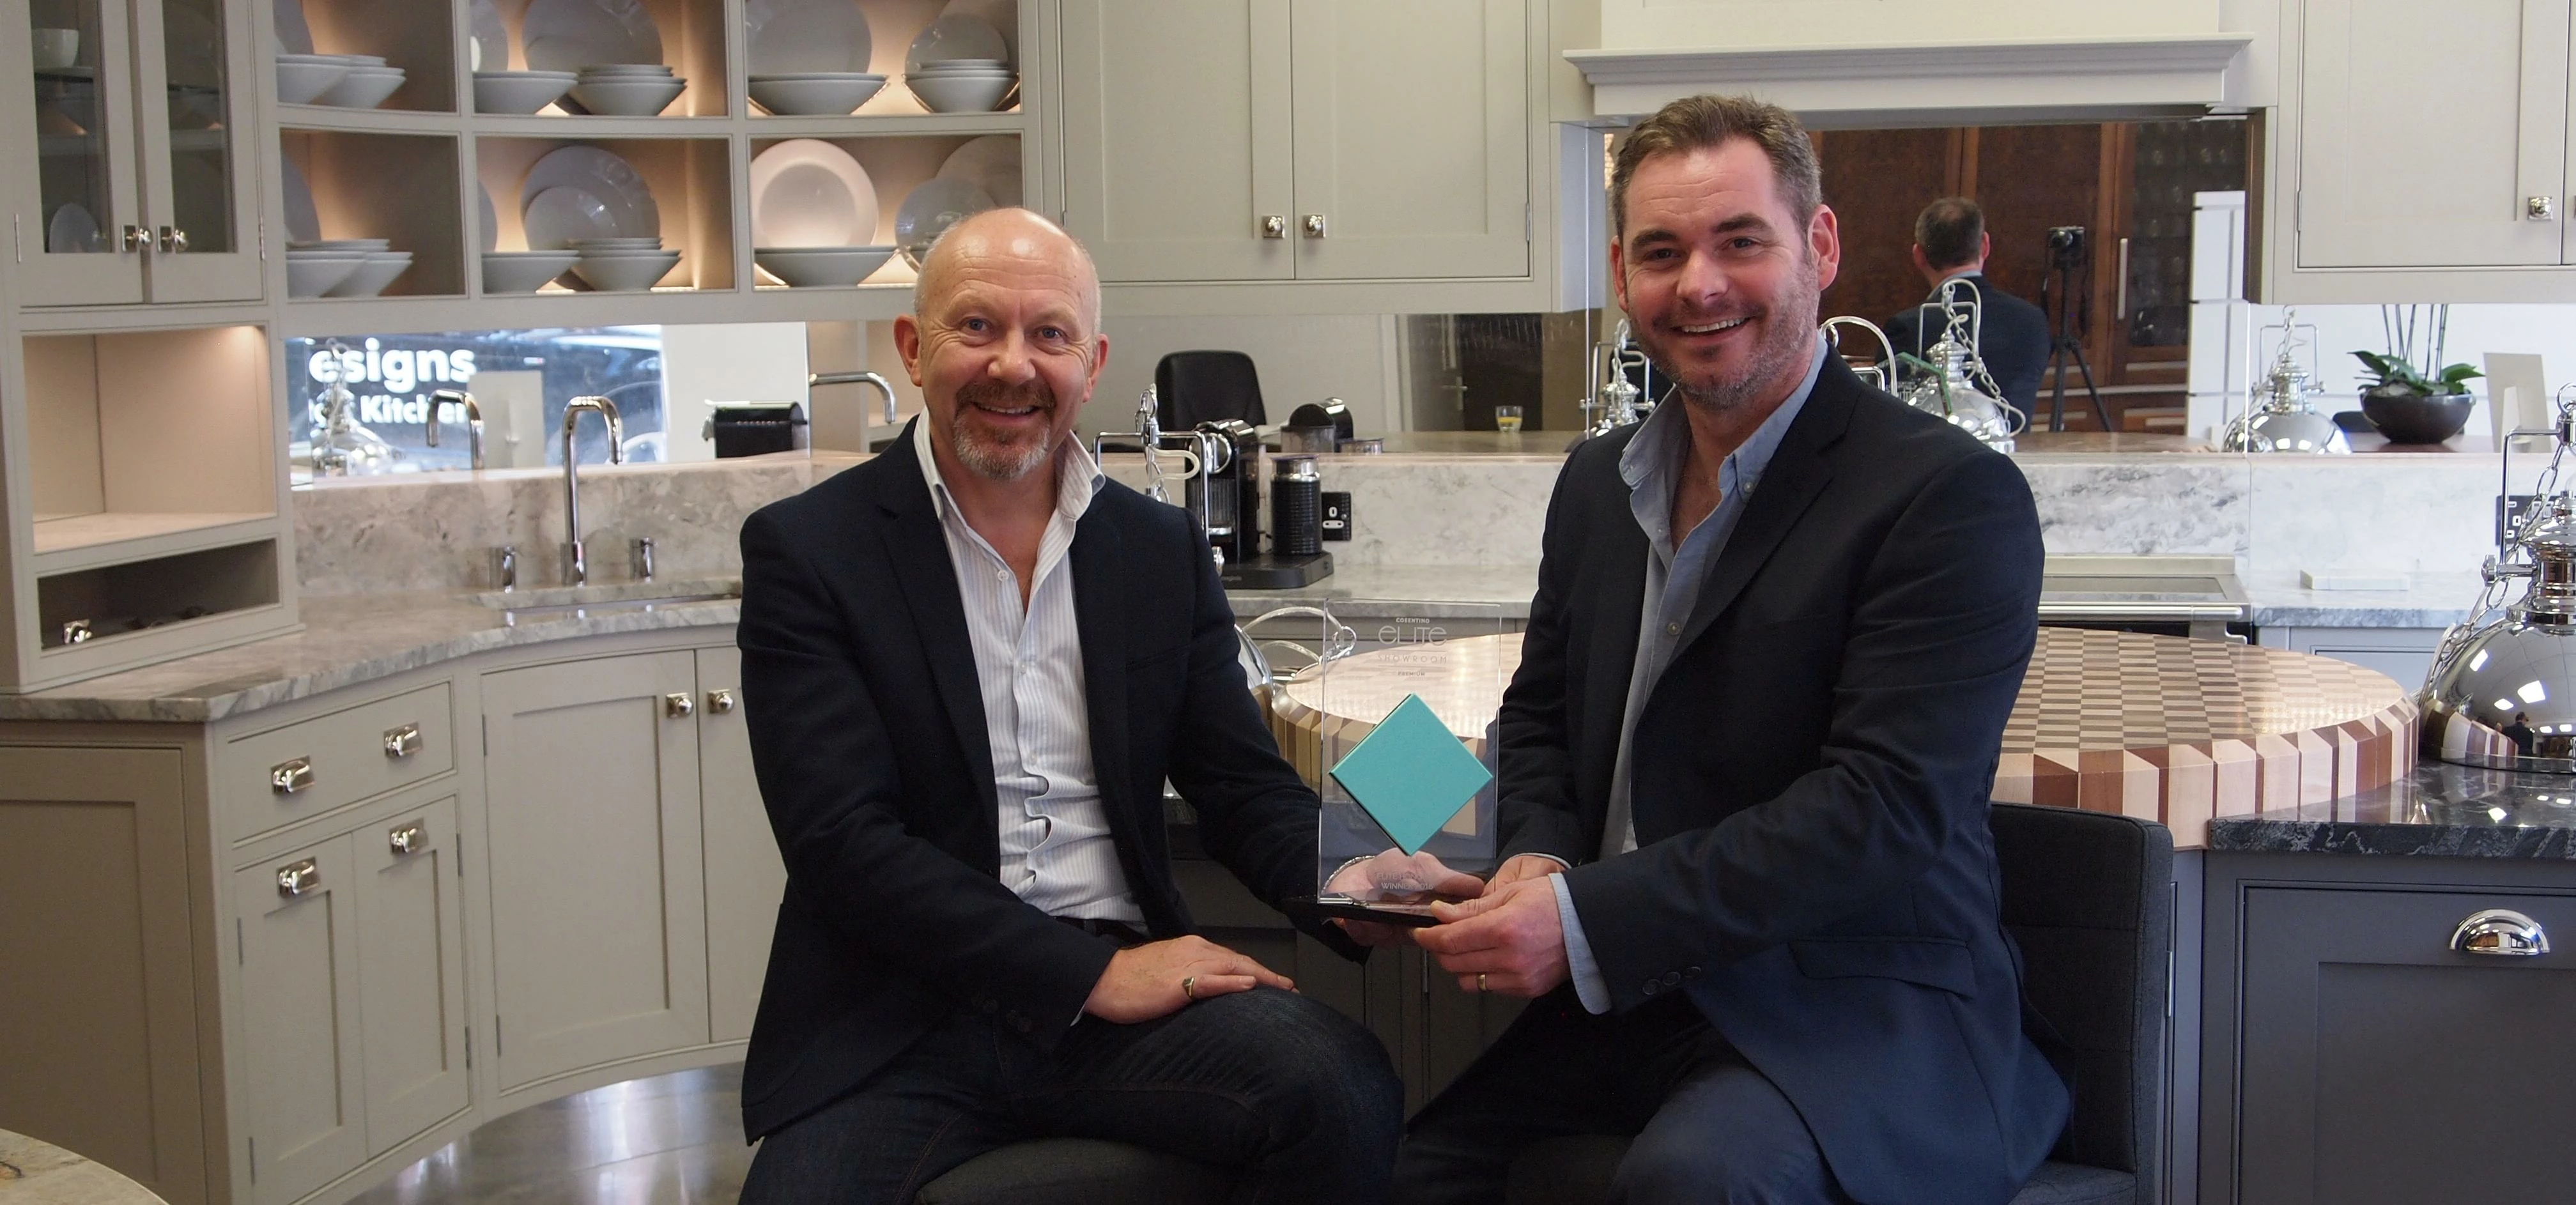 Award-winning designer George Campbell and founder of Oakstone Designs Stephen Kennedy